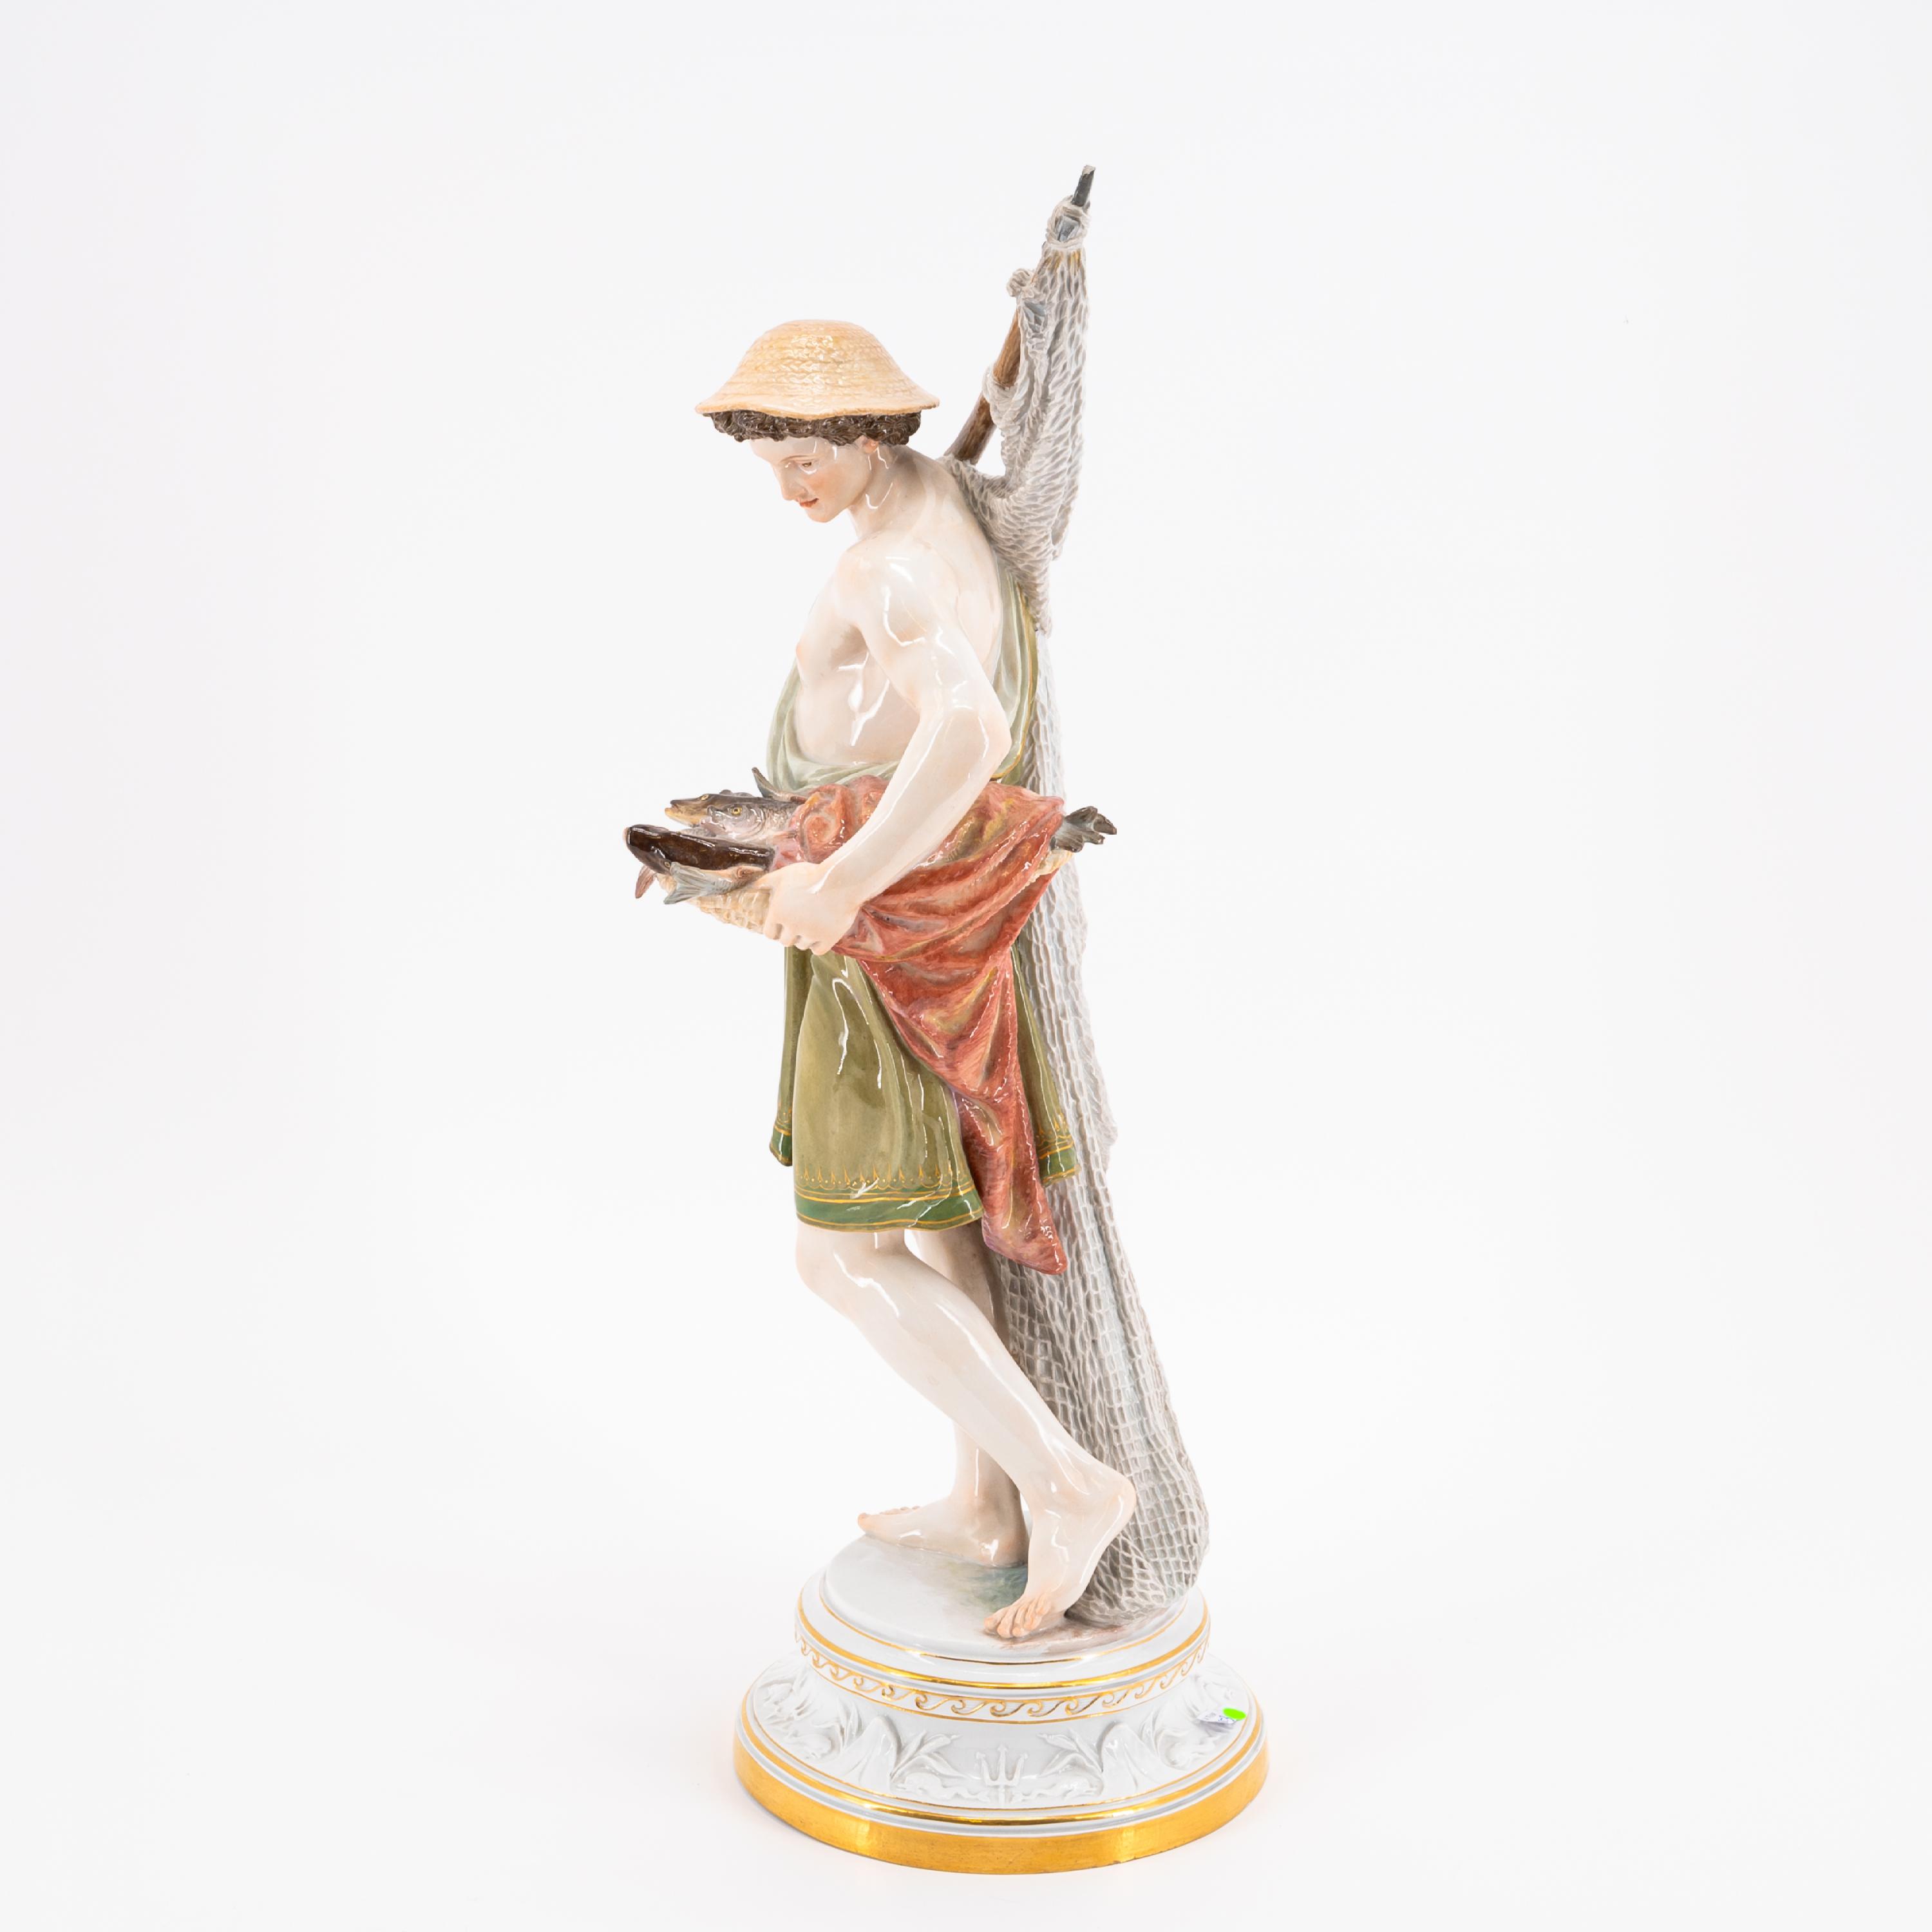 LARGE PORCELAIN FIGURINE OF A FISHER - Image 3 of 6